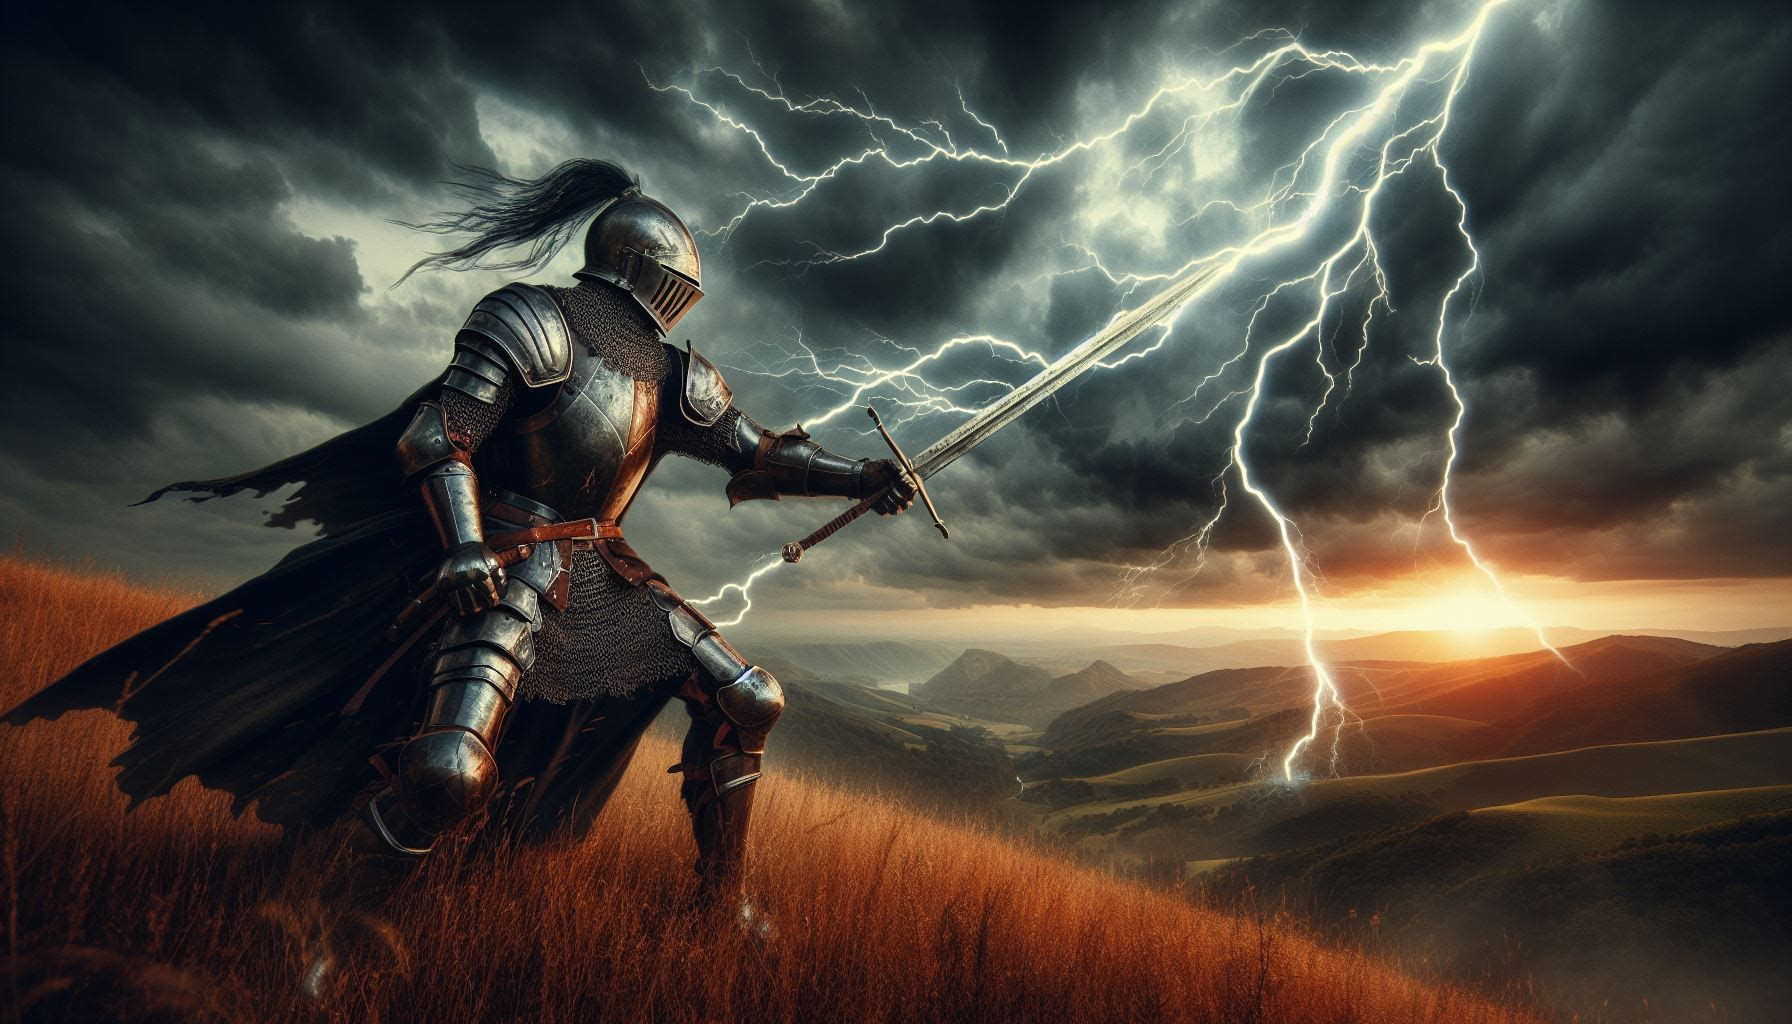 Knight wearing a "Suit of Armour" being struck by lightning